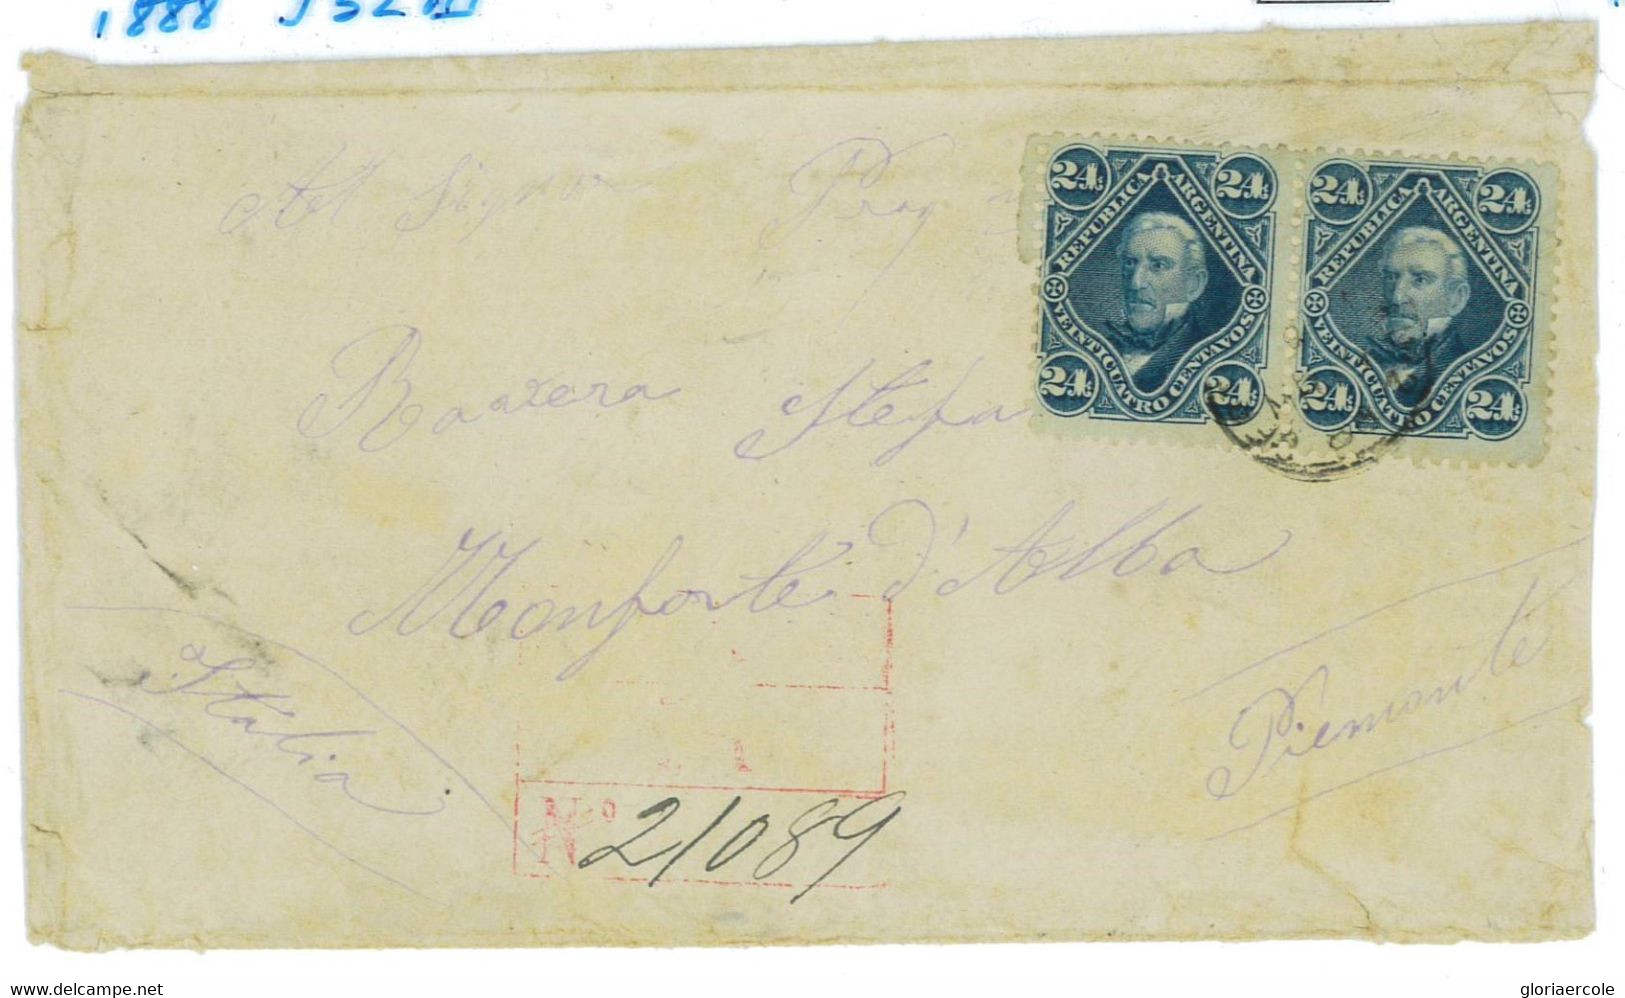 P0253 - ARGENTINA - POSTAL HISTORY - Jalil # 52 Pair - REGISTERED COVER  To ITALY  1888 - Lettres & Documents